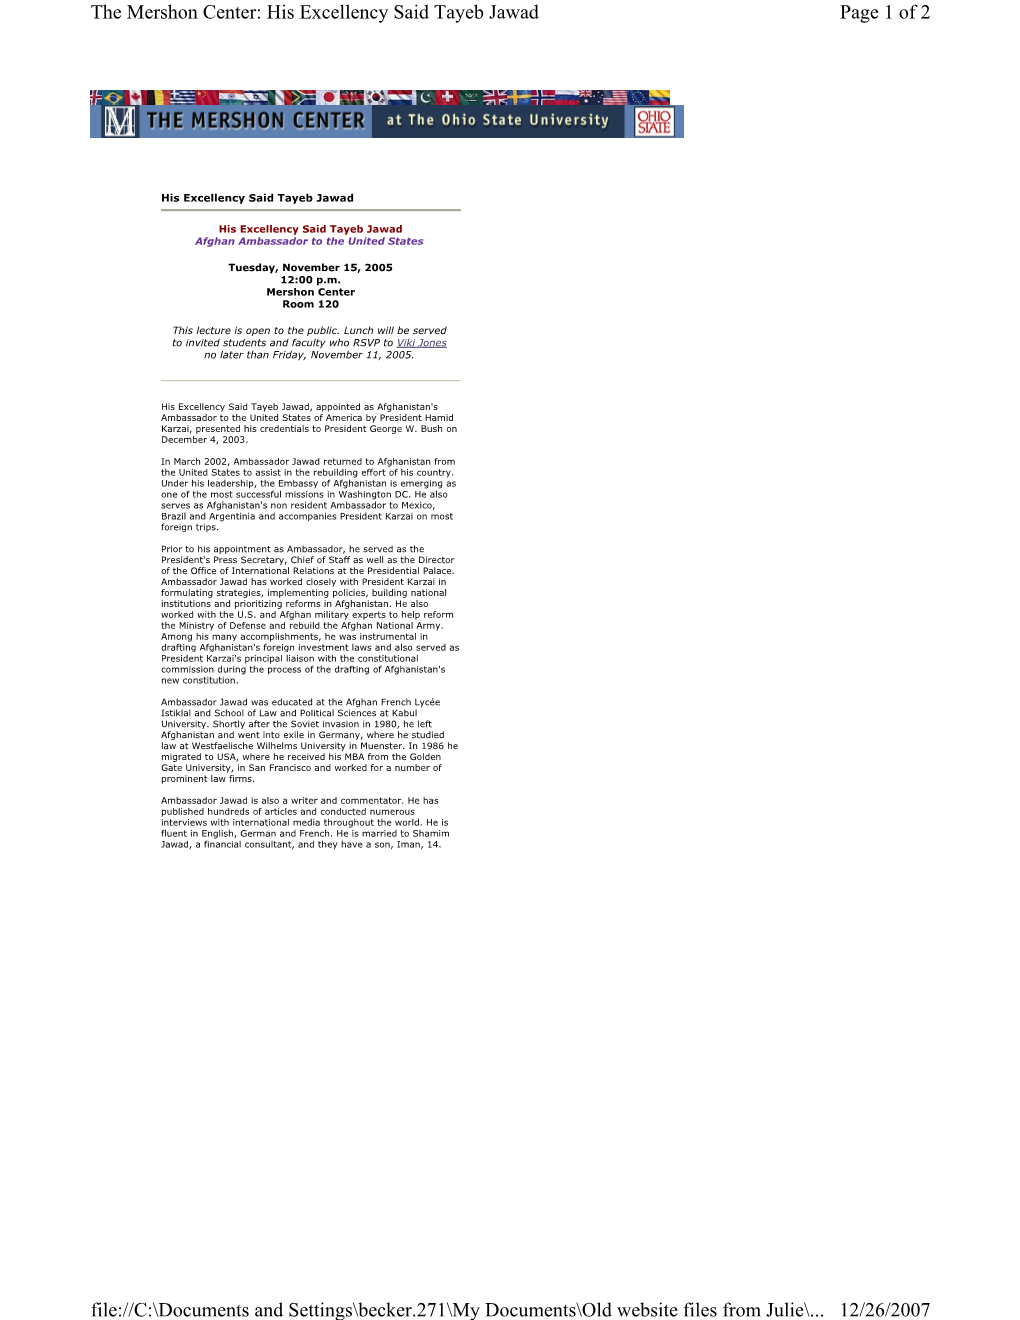 Page 1 of 2 the Mershon Center: His Excellency Said Tayeb Jawad 12/26/2007 File://C:\Documents and Settings\Becker.271\My Docume